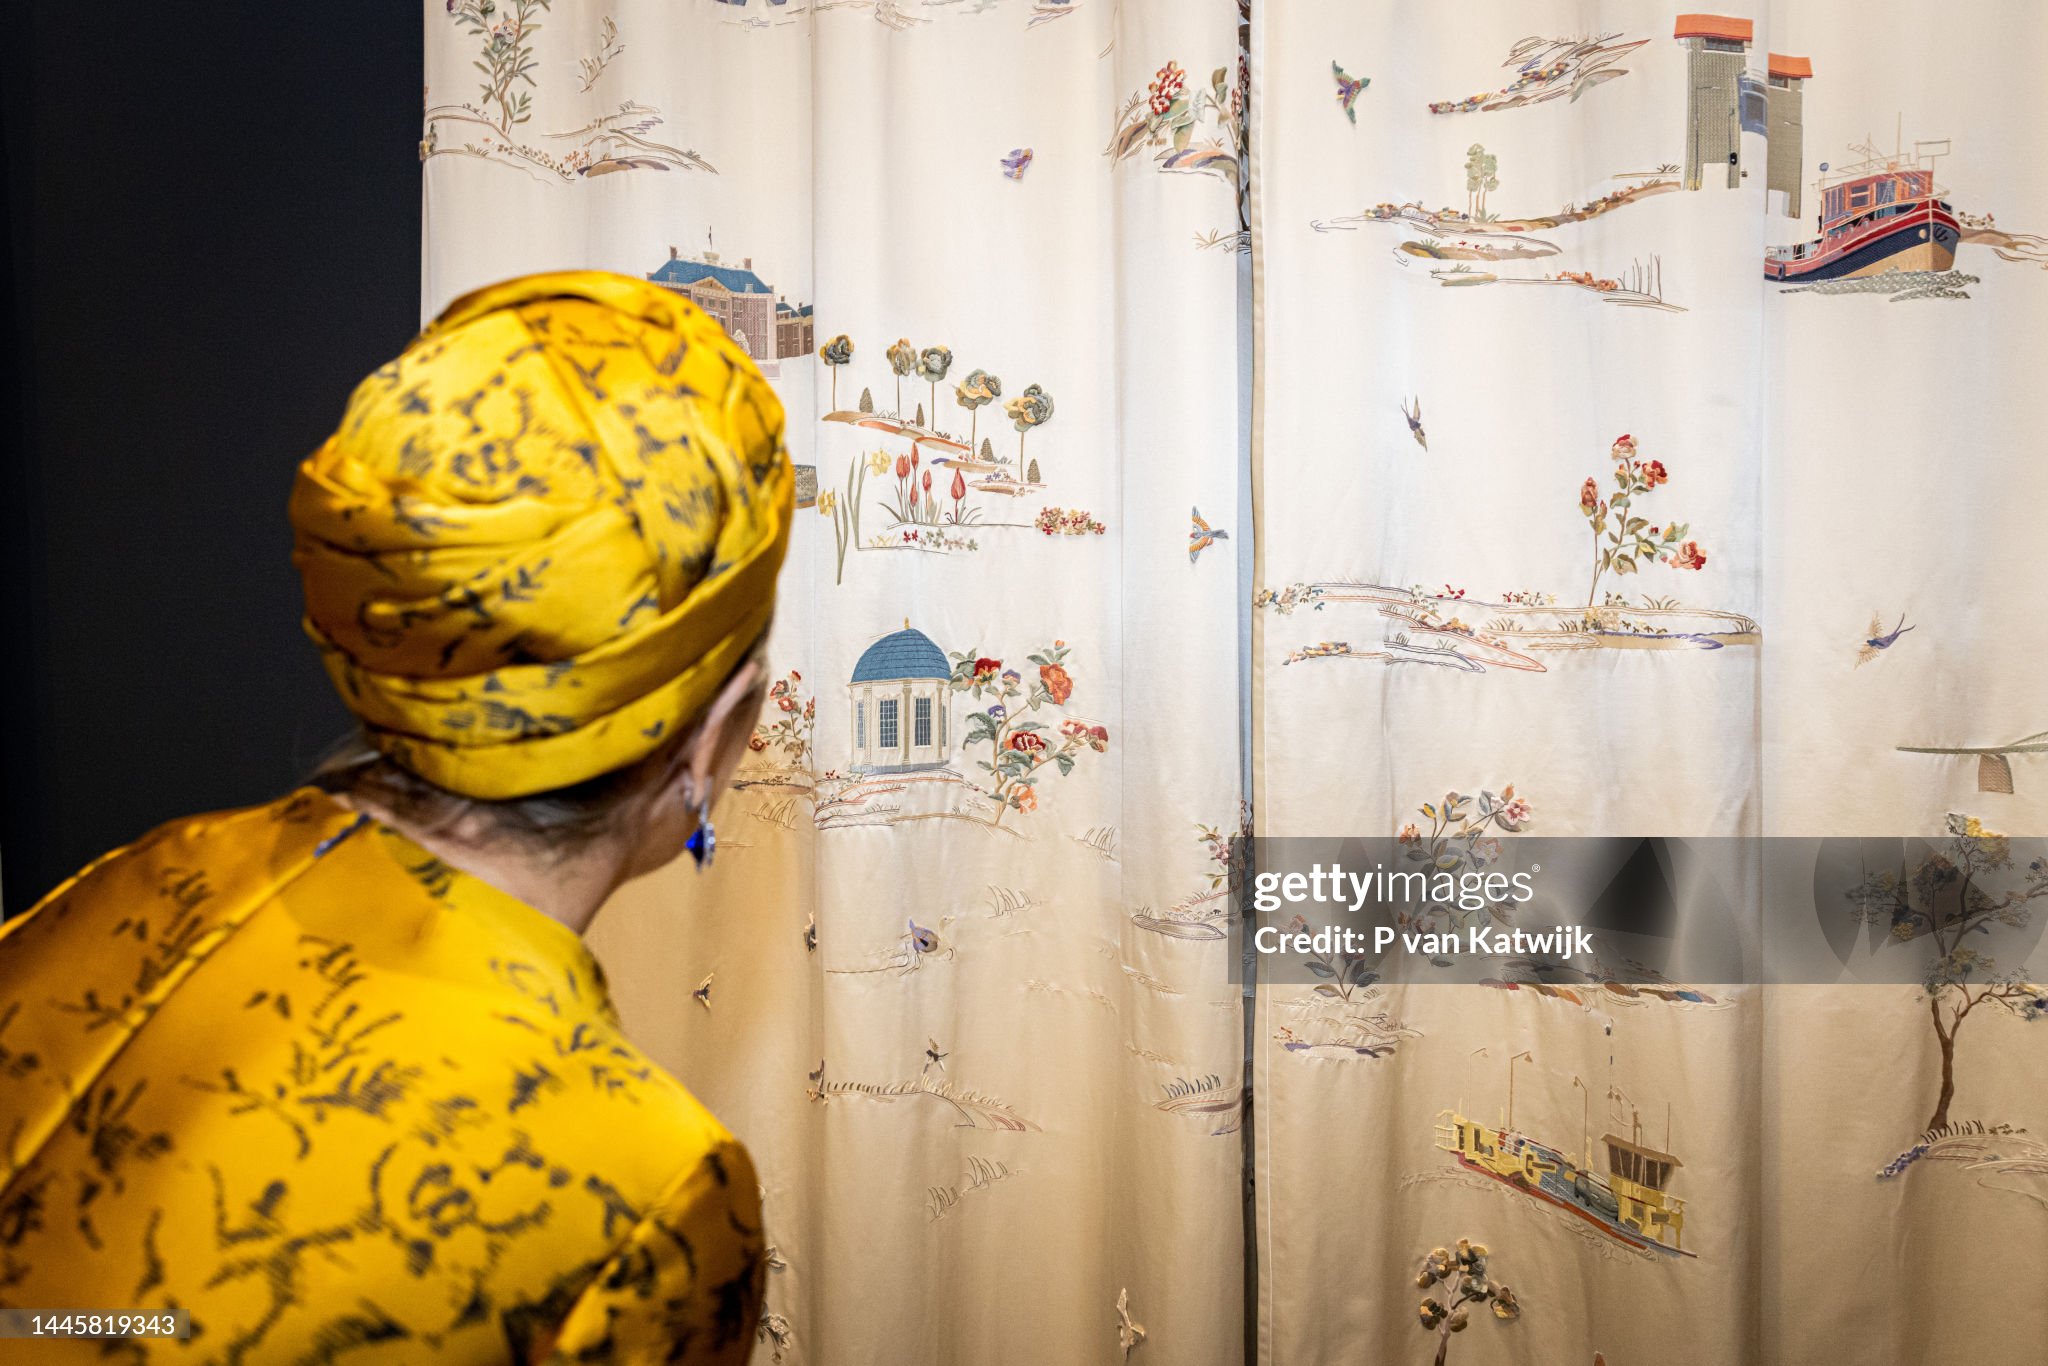 queen-maxima-of-the-netherlands-visits-textile-museum-to-present-her-new-curtains-for-palace.jpg?s=2048x2048&w=gi&k=20&c=Sh3XUshw6ItrHp9ov-PdD8-BcYk4701xTefT6uWQTN4=